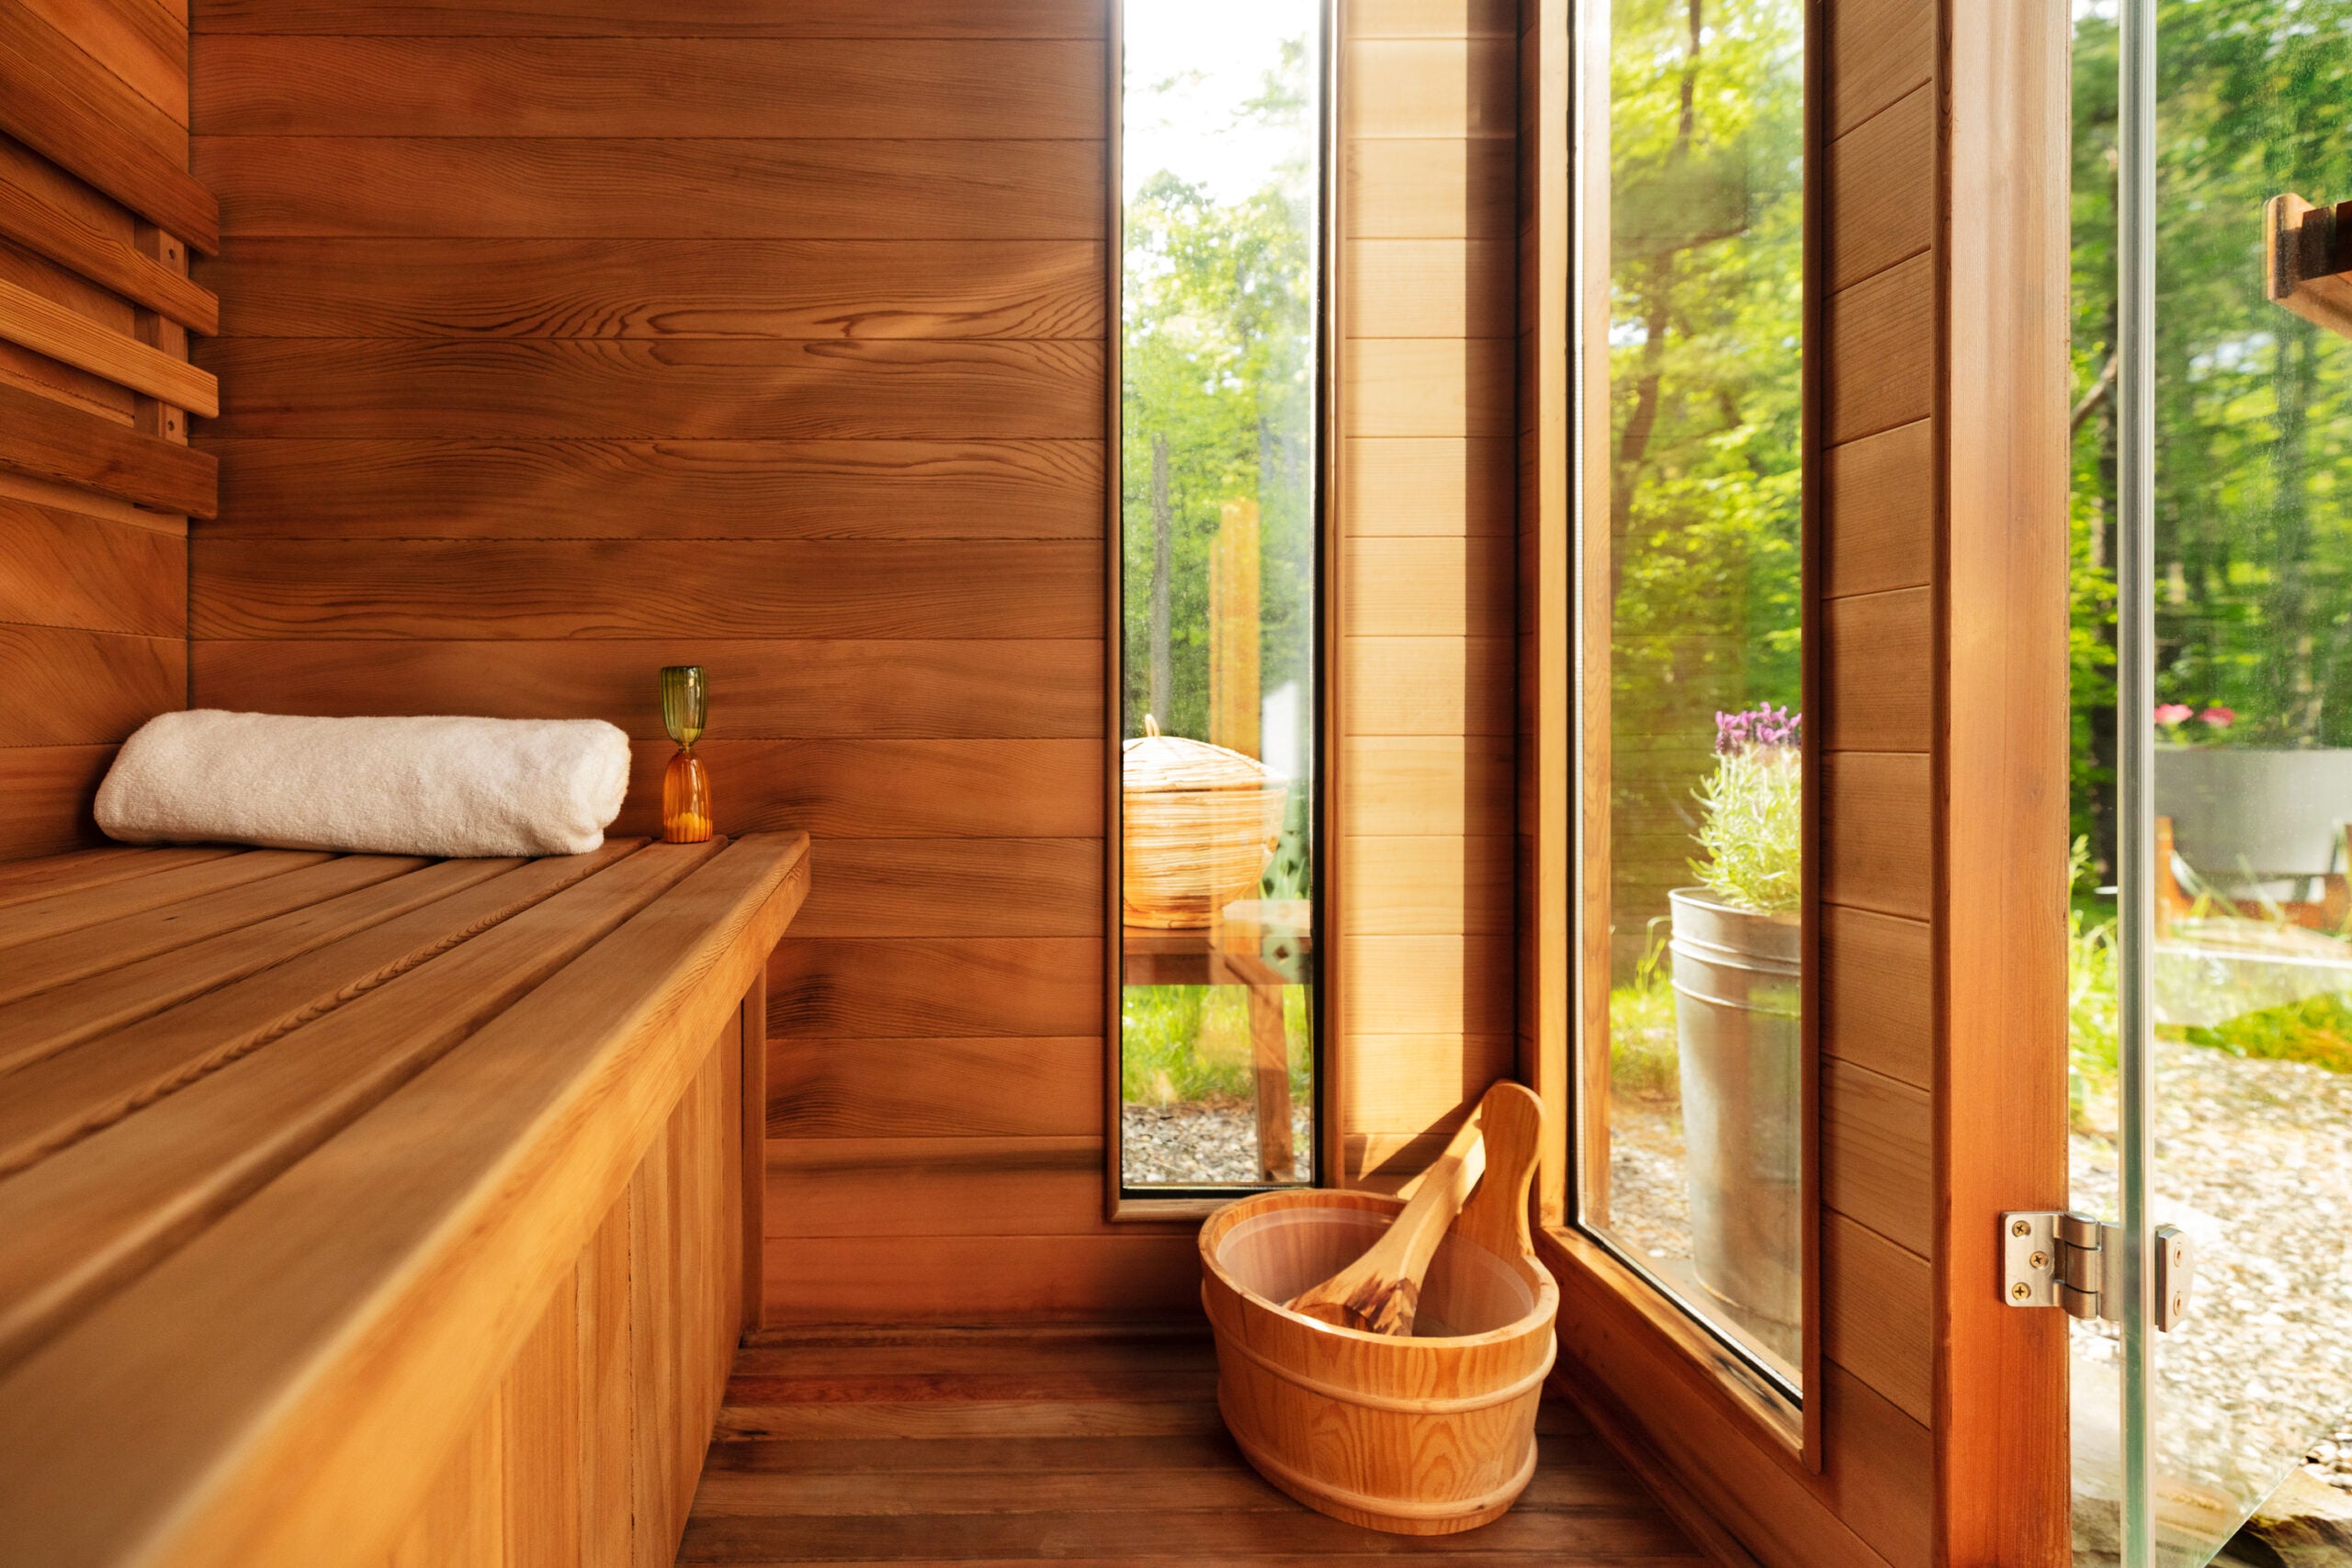 Even Small Space Dwellers Can Carve Out a Spot at Home for the Best Infrared Saunas